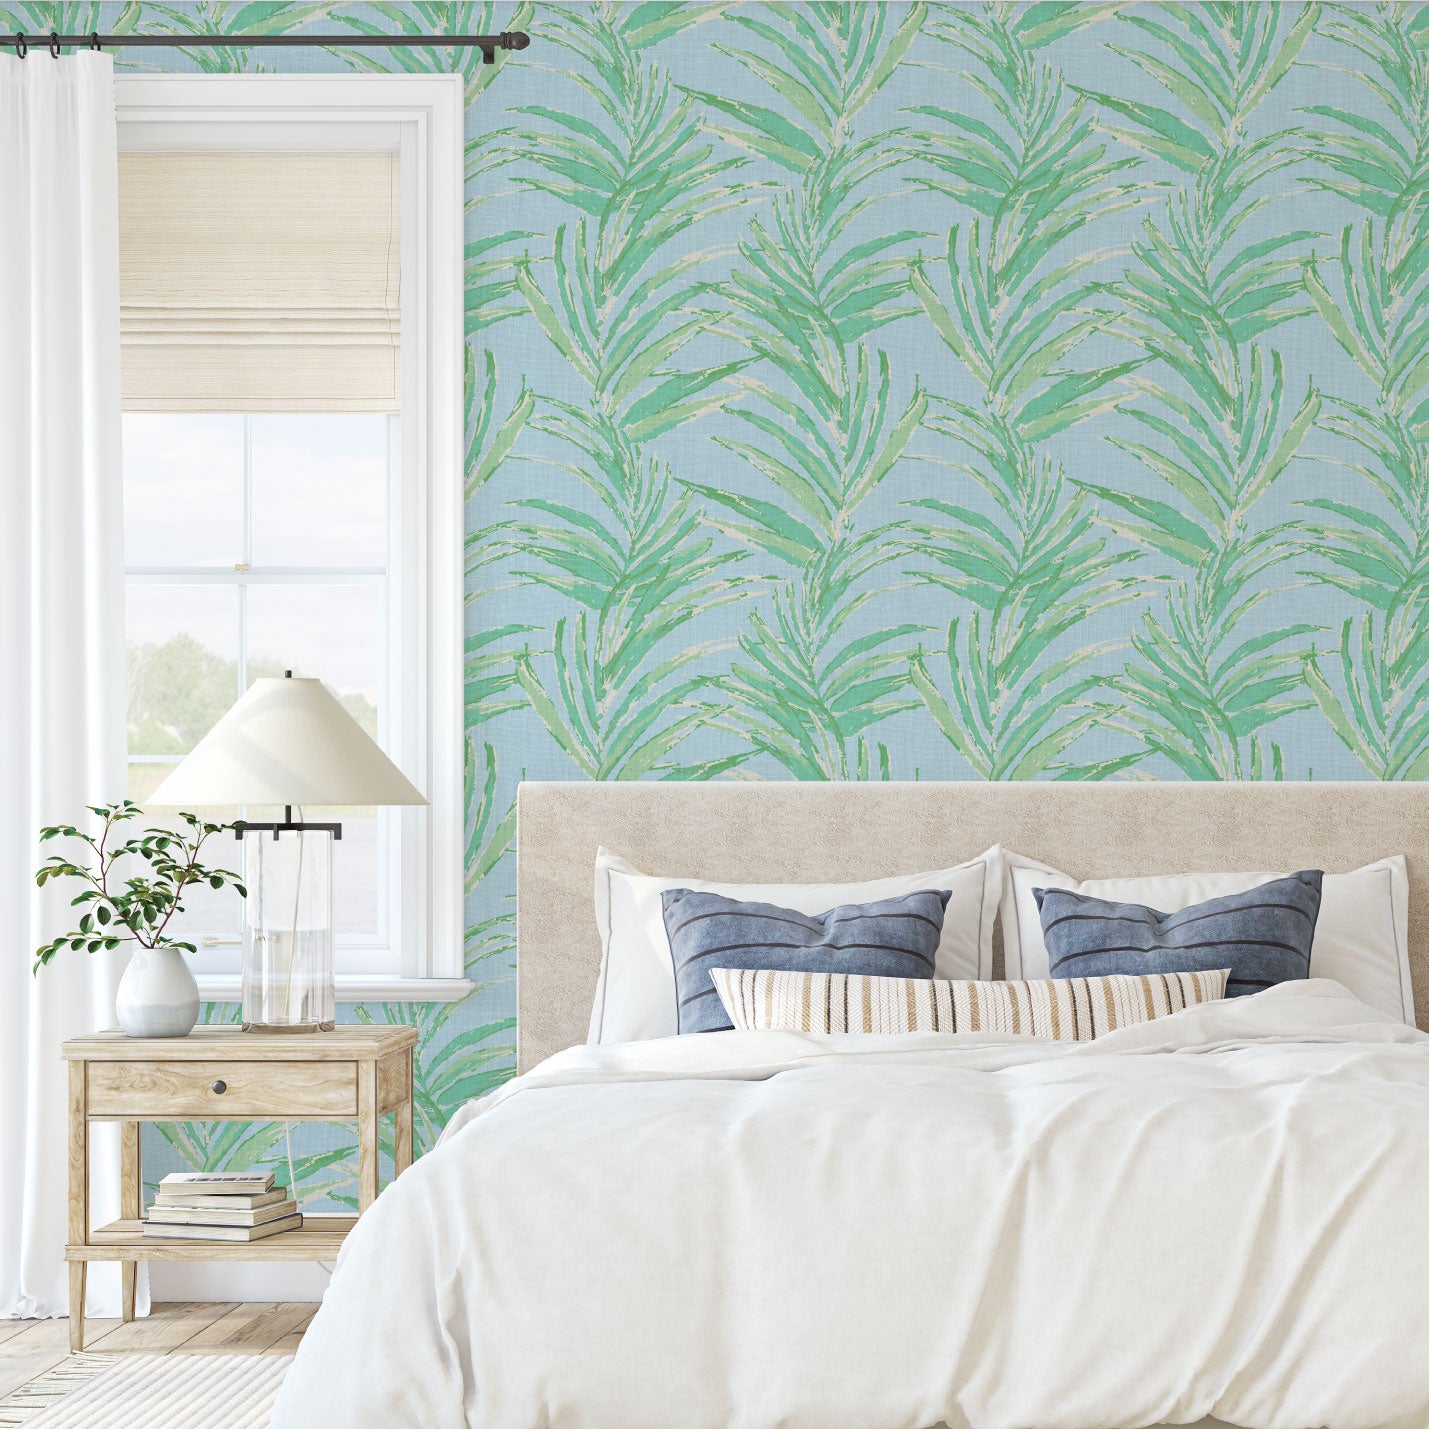 printed wallpaper of linear twisted palm leaves vertical oversized stripes Grasscloth Natural Textured Eco-Friendly Non-toxic High-quality Sustainable practices Sustainability Interior Design Wall covering Bold Wallpaper Custom Tailor-made Retro chic Tropical jungle beverly hills hilton hotel palm print garden botanical Coastal Seashore Waterfront Vacation home styling Retreat Relaxed beach vibes Beach cottage Shoreline beverly hills hotel ocean blue sky light baby pastel green mint sage linen